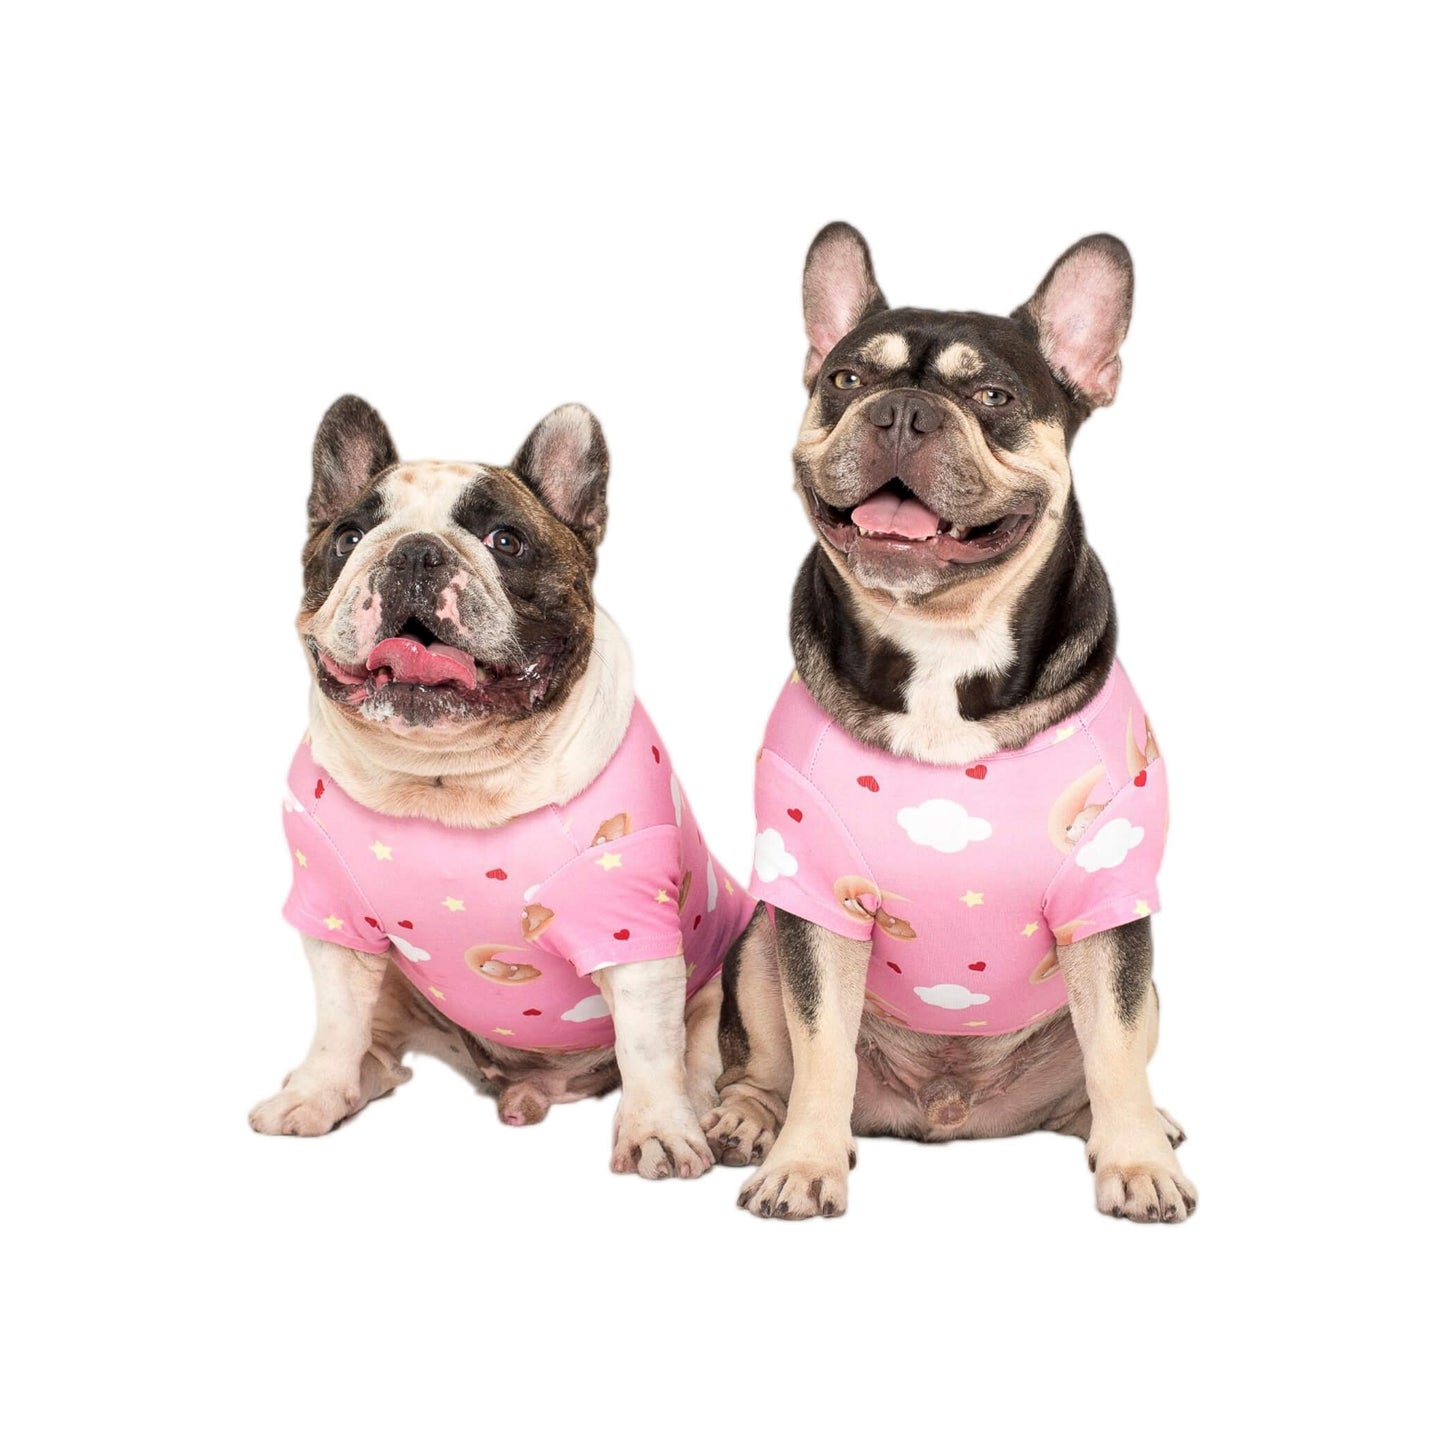 Two French Bulldogs sitting down wearing Vibrant Hound's Lil Dreamer dog pyjamas. They are pink with white clouds, love hearts, and stars.